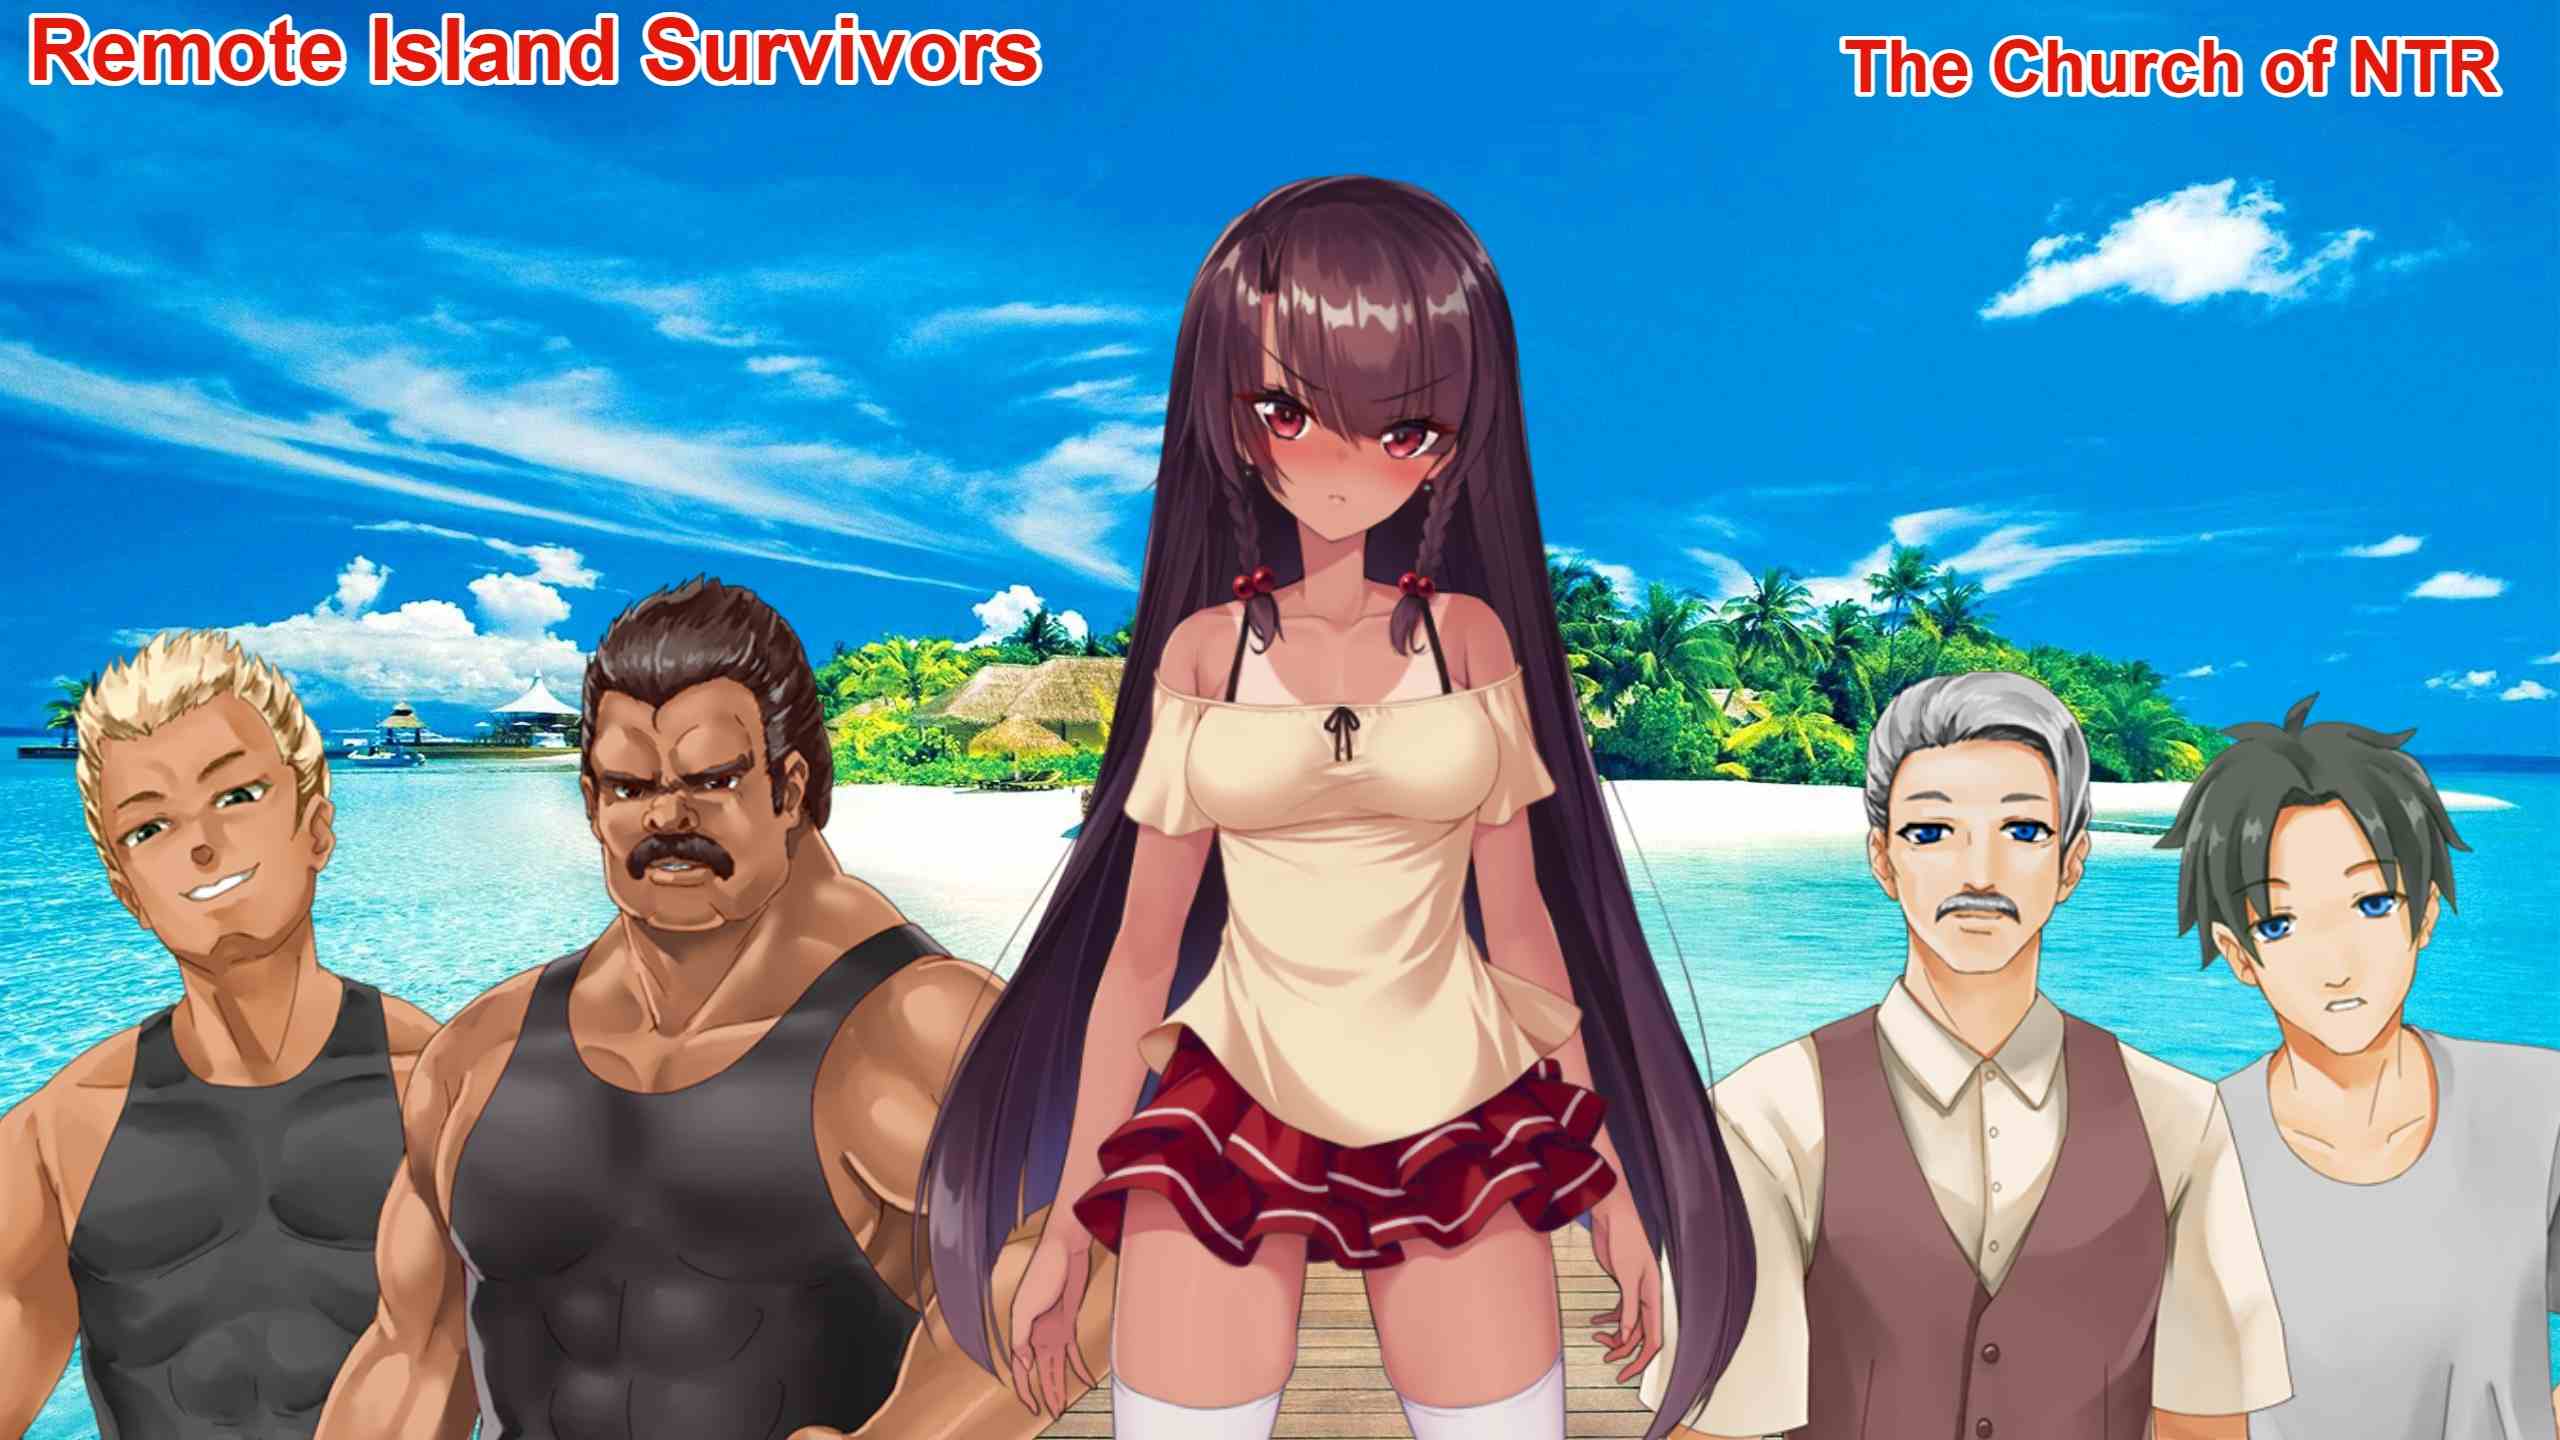 Remote Island Survivors [The Church of NTR] Adult xxx Game Download